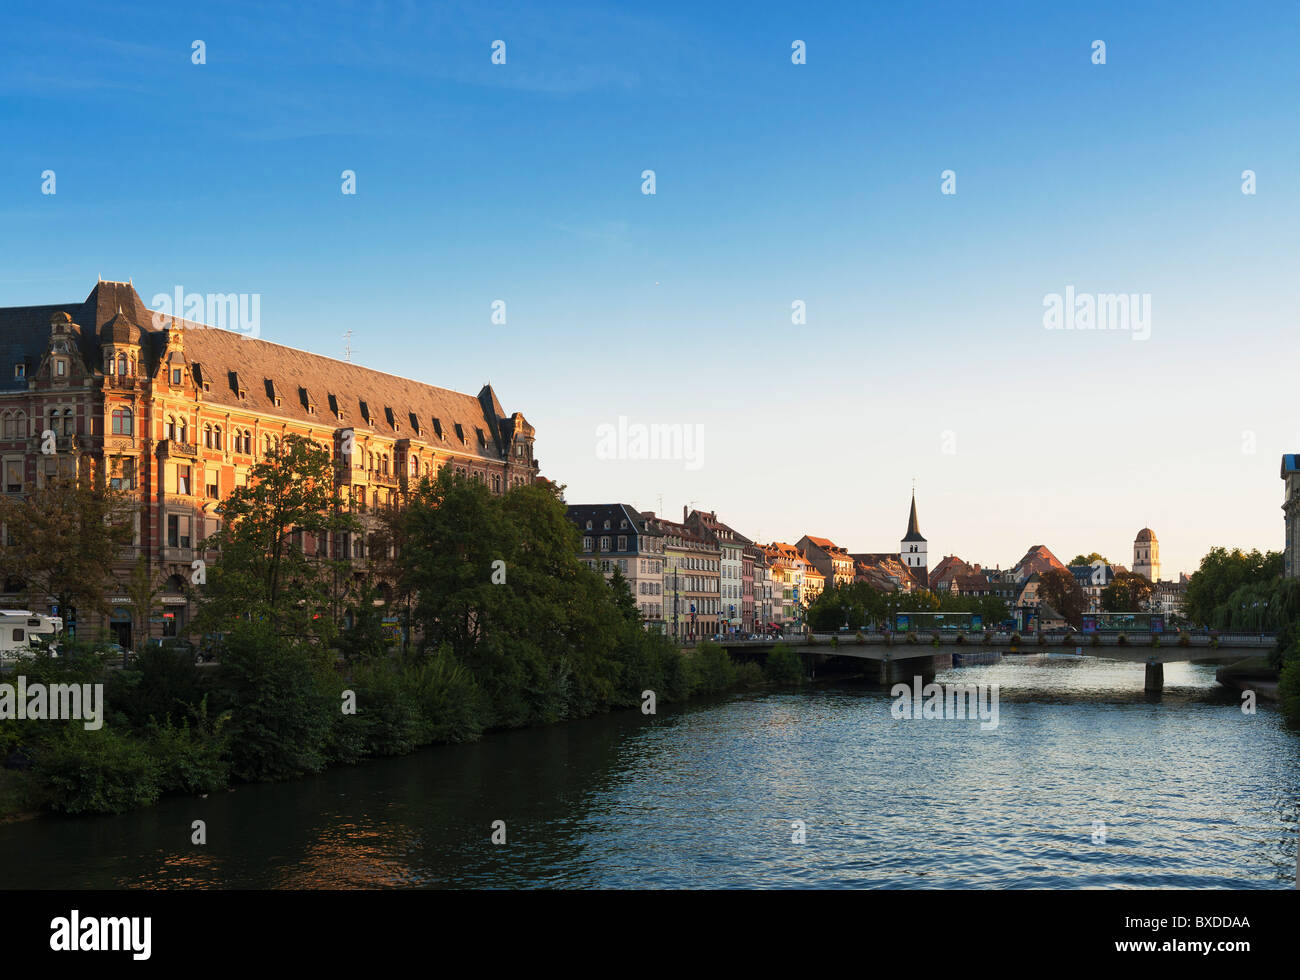 Gallia building, student residence, dorm accomodation, Ill river, waterfront houses perspective, sunset, Strasbourg, Alsace, France, Europe, Stock Photo